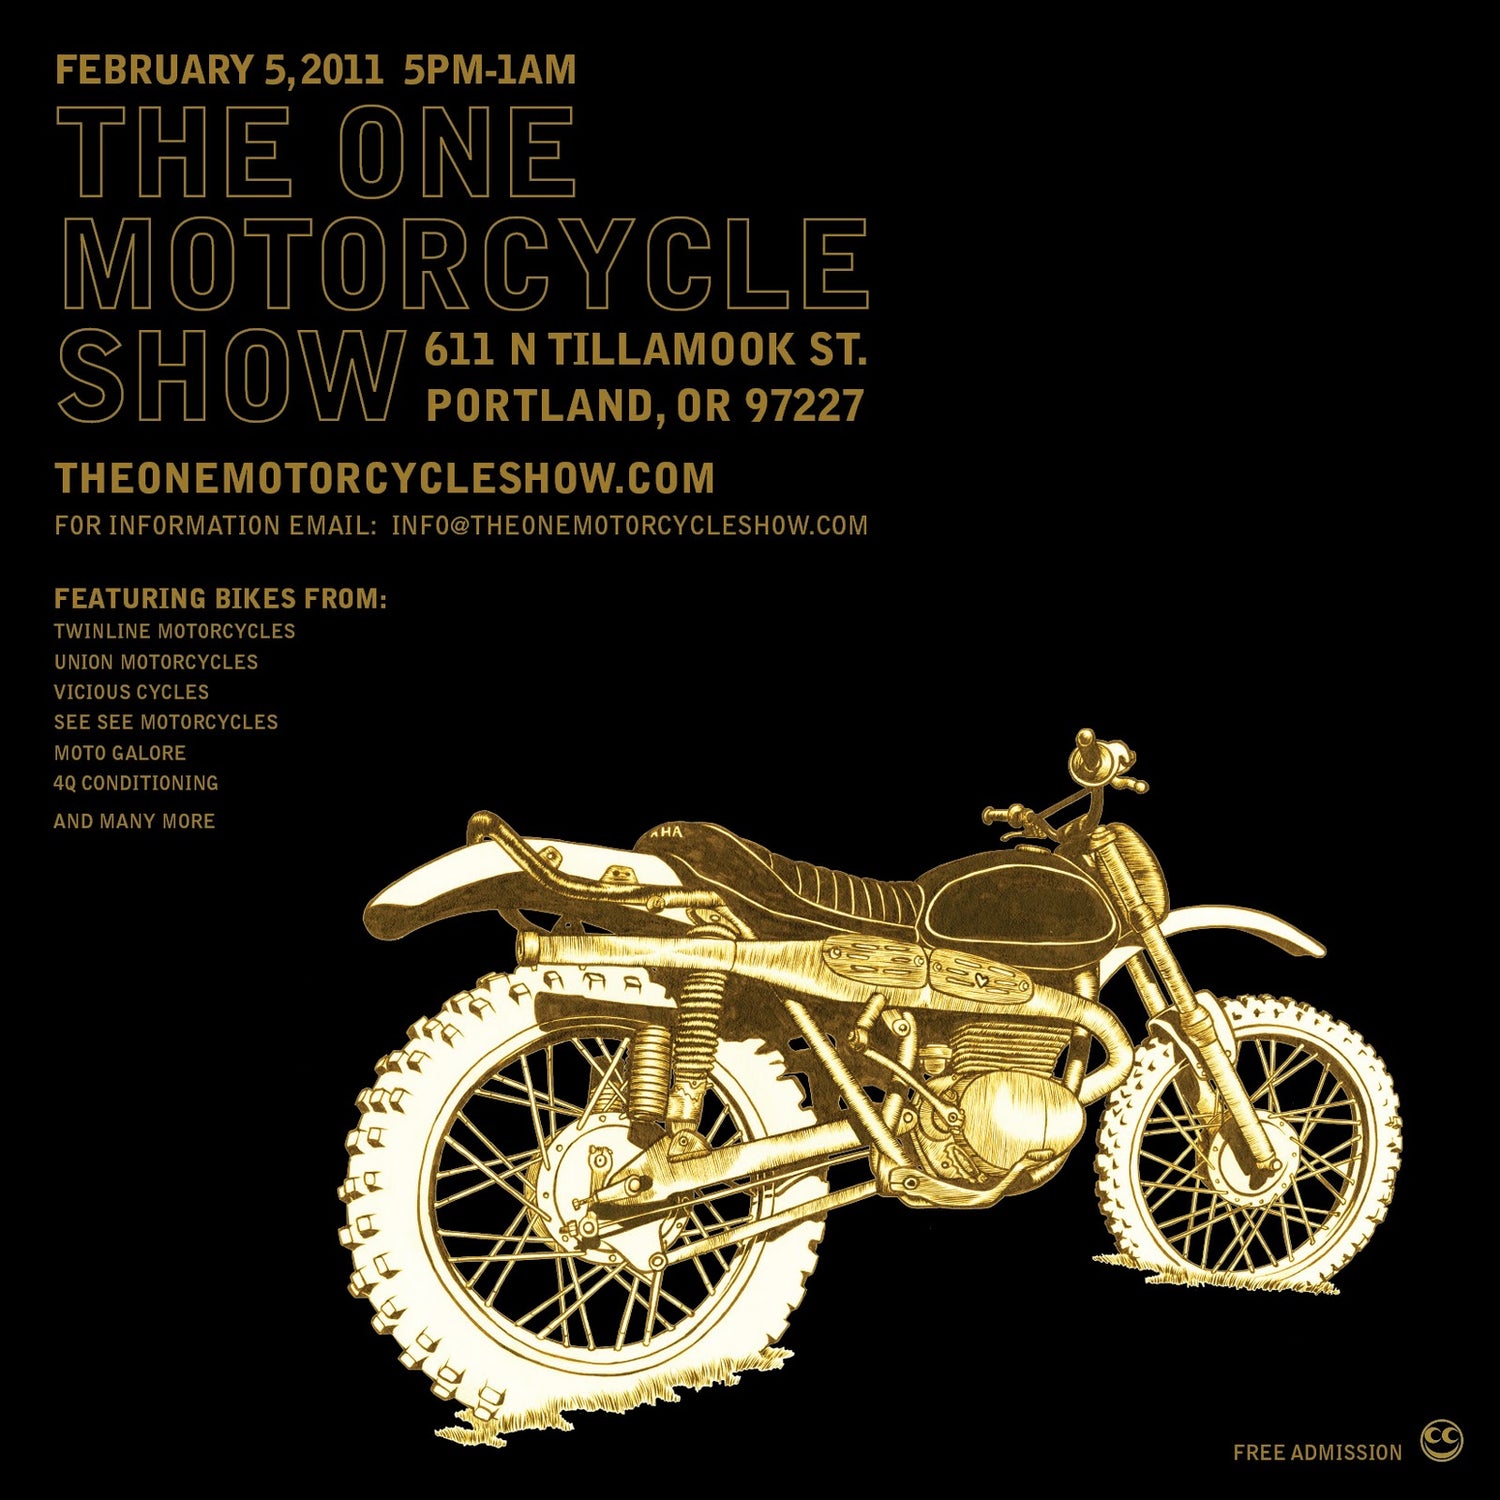 The One Motorcycle Show: Portland